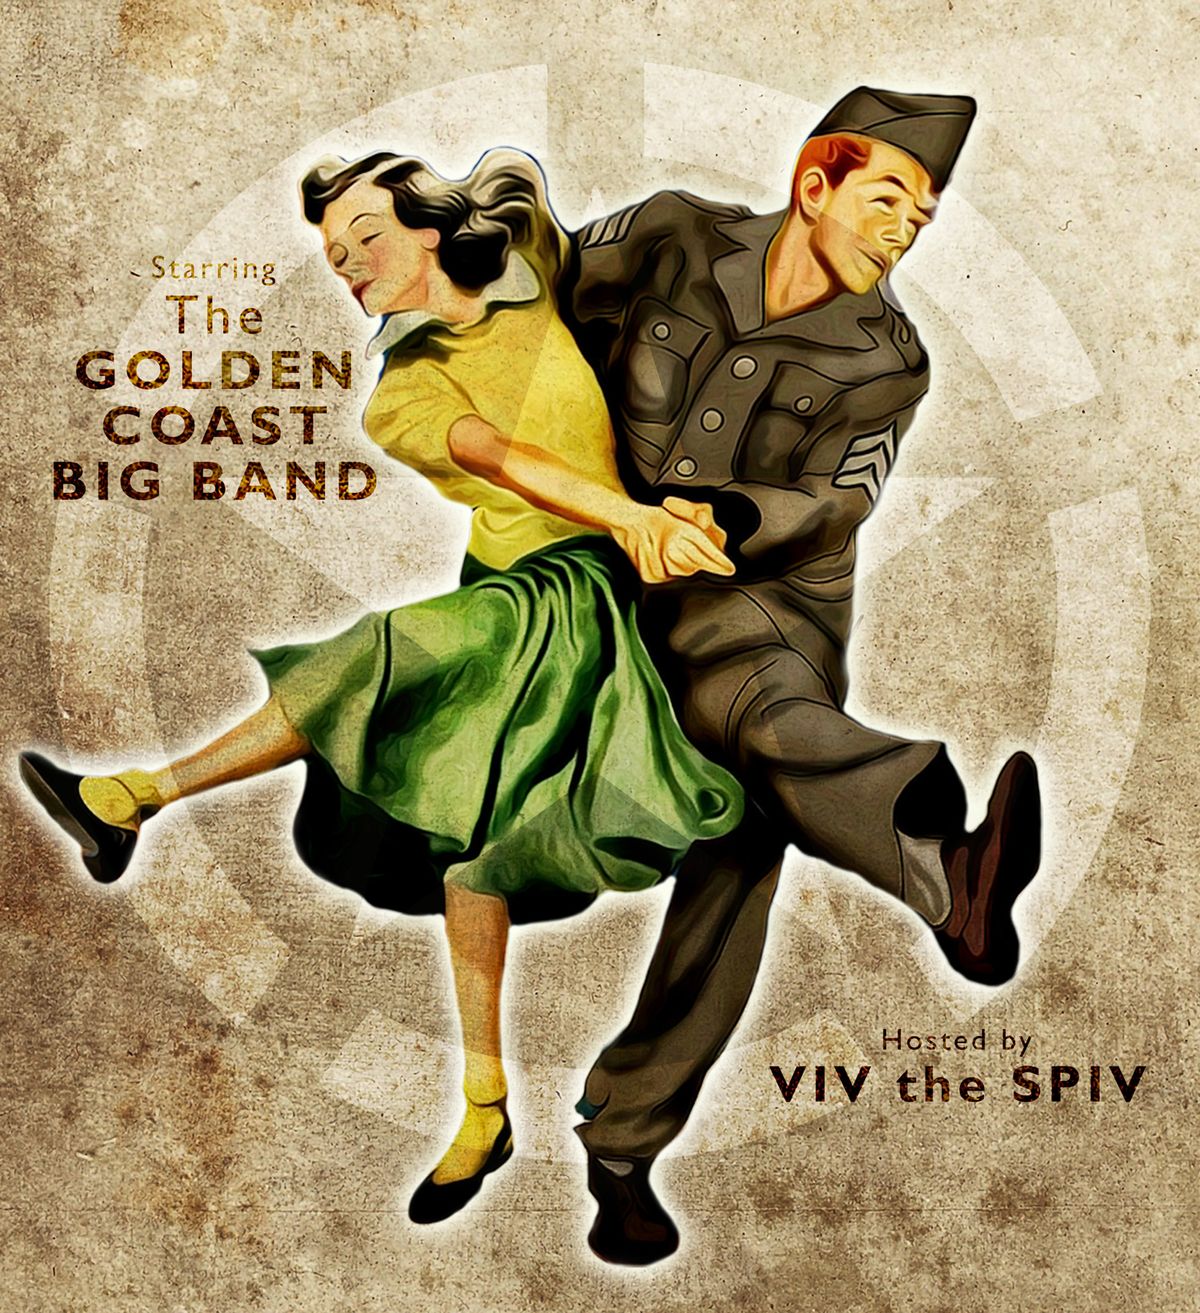 1940's Dance - with the Golden Coast Big Band